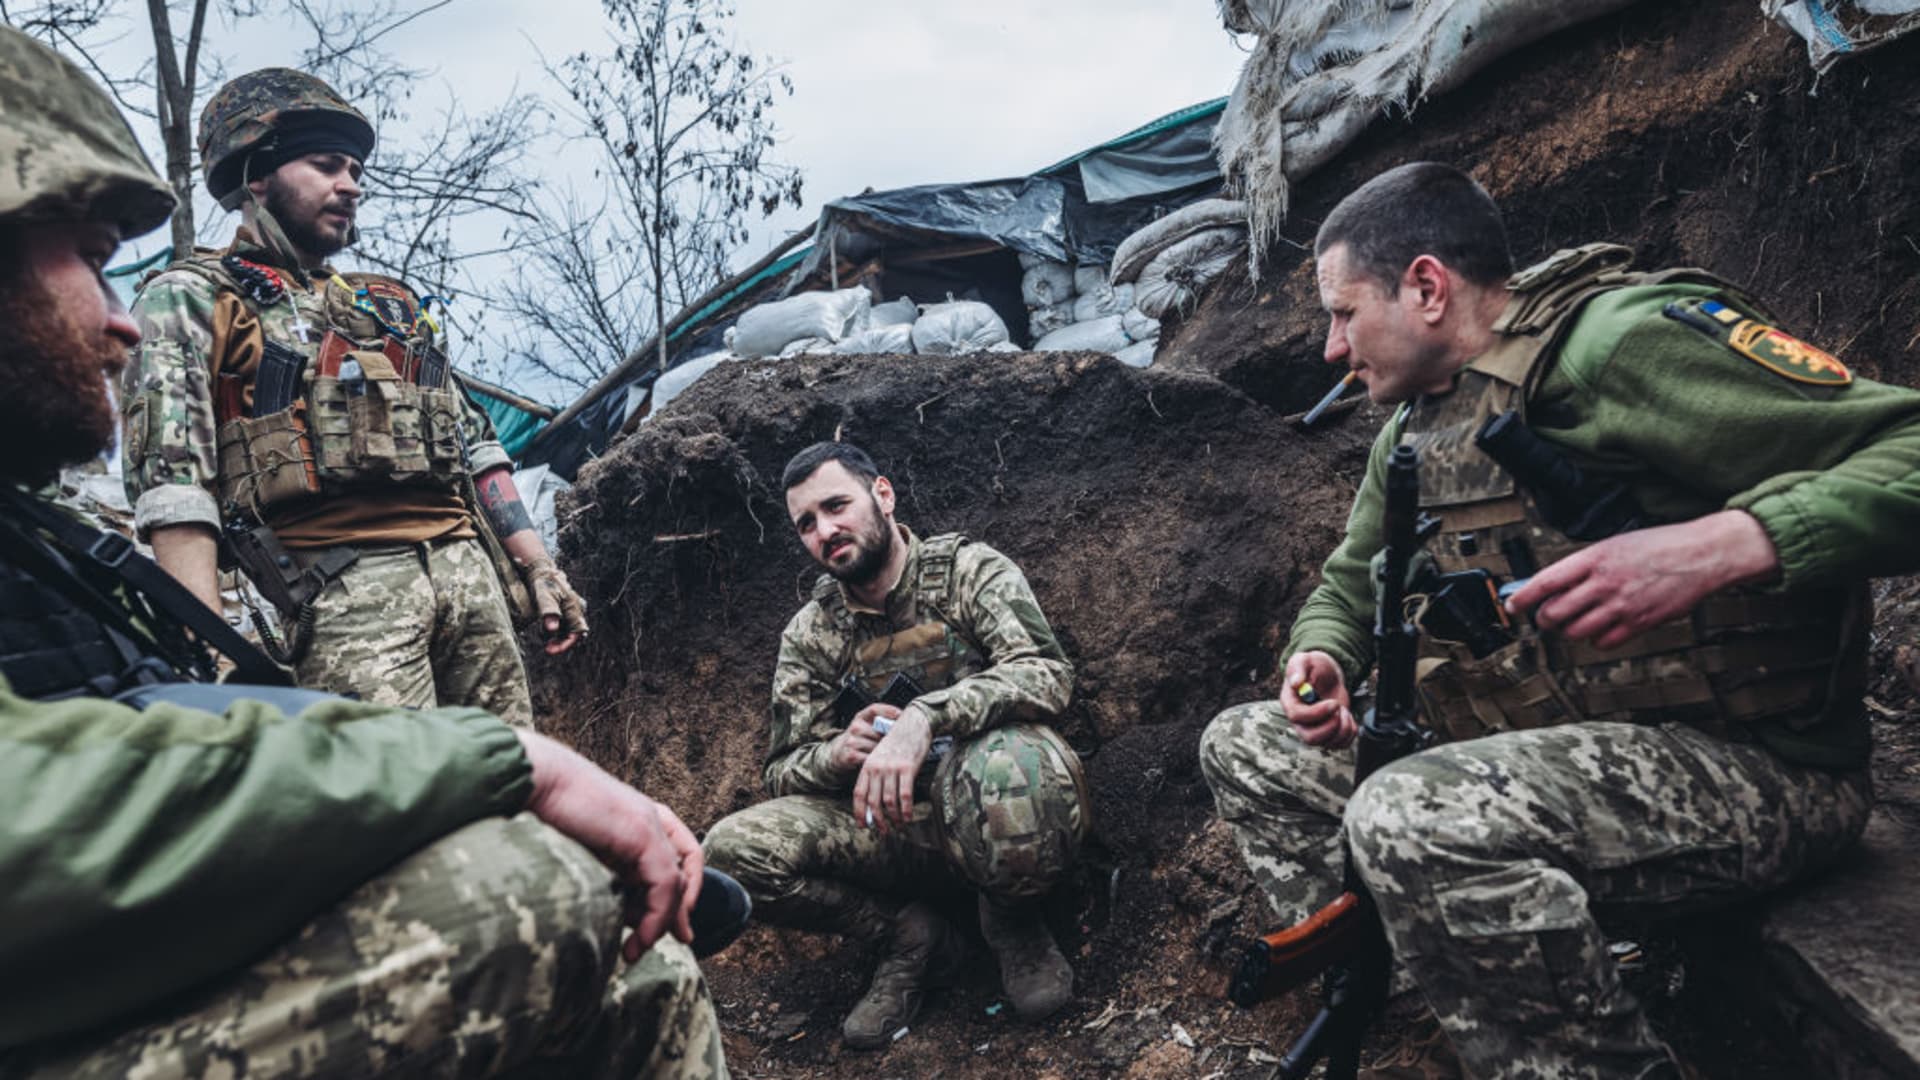 Ukrainian soldiers talk to each other at a Ukrainian frontline in Donbass, Ukraine on April 11, 2022.